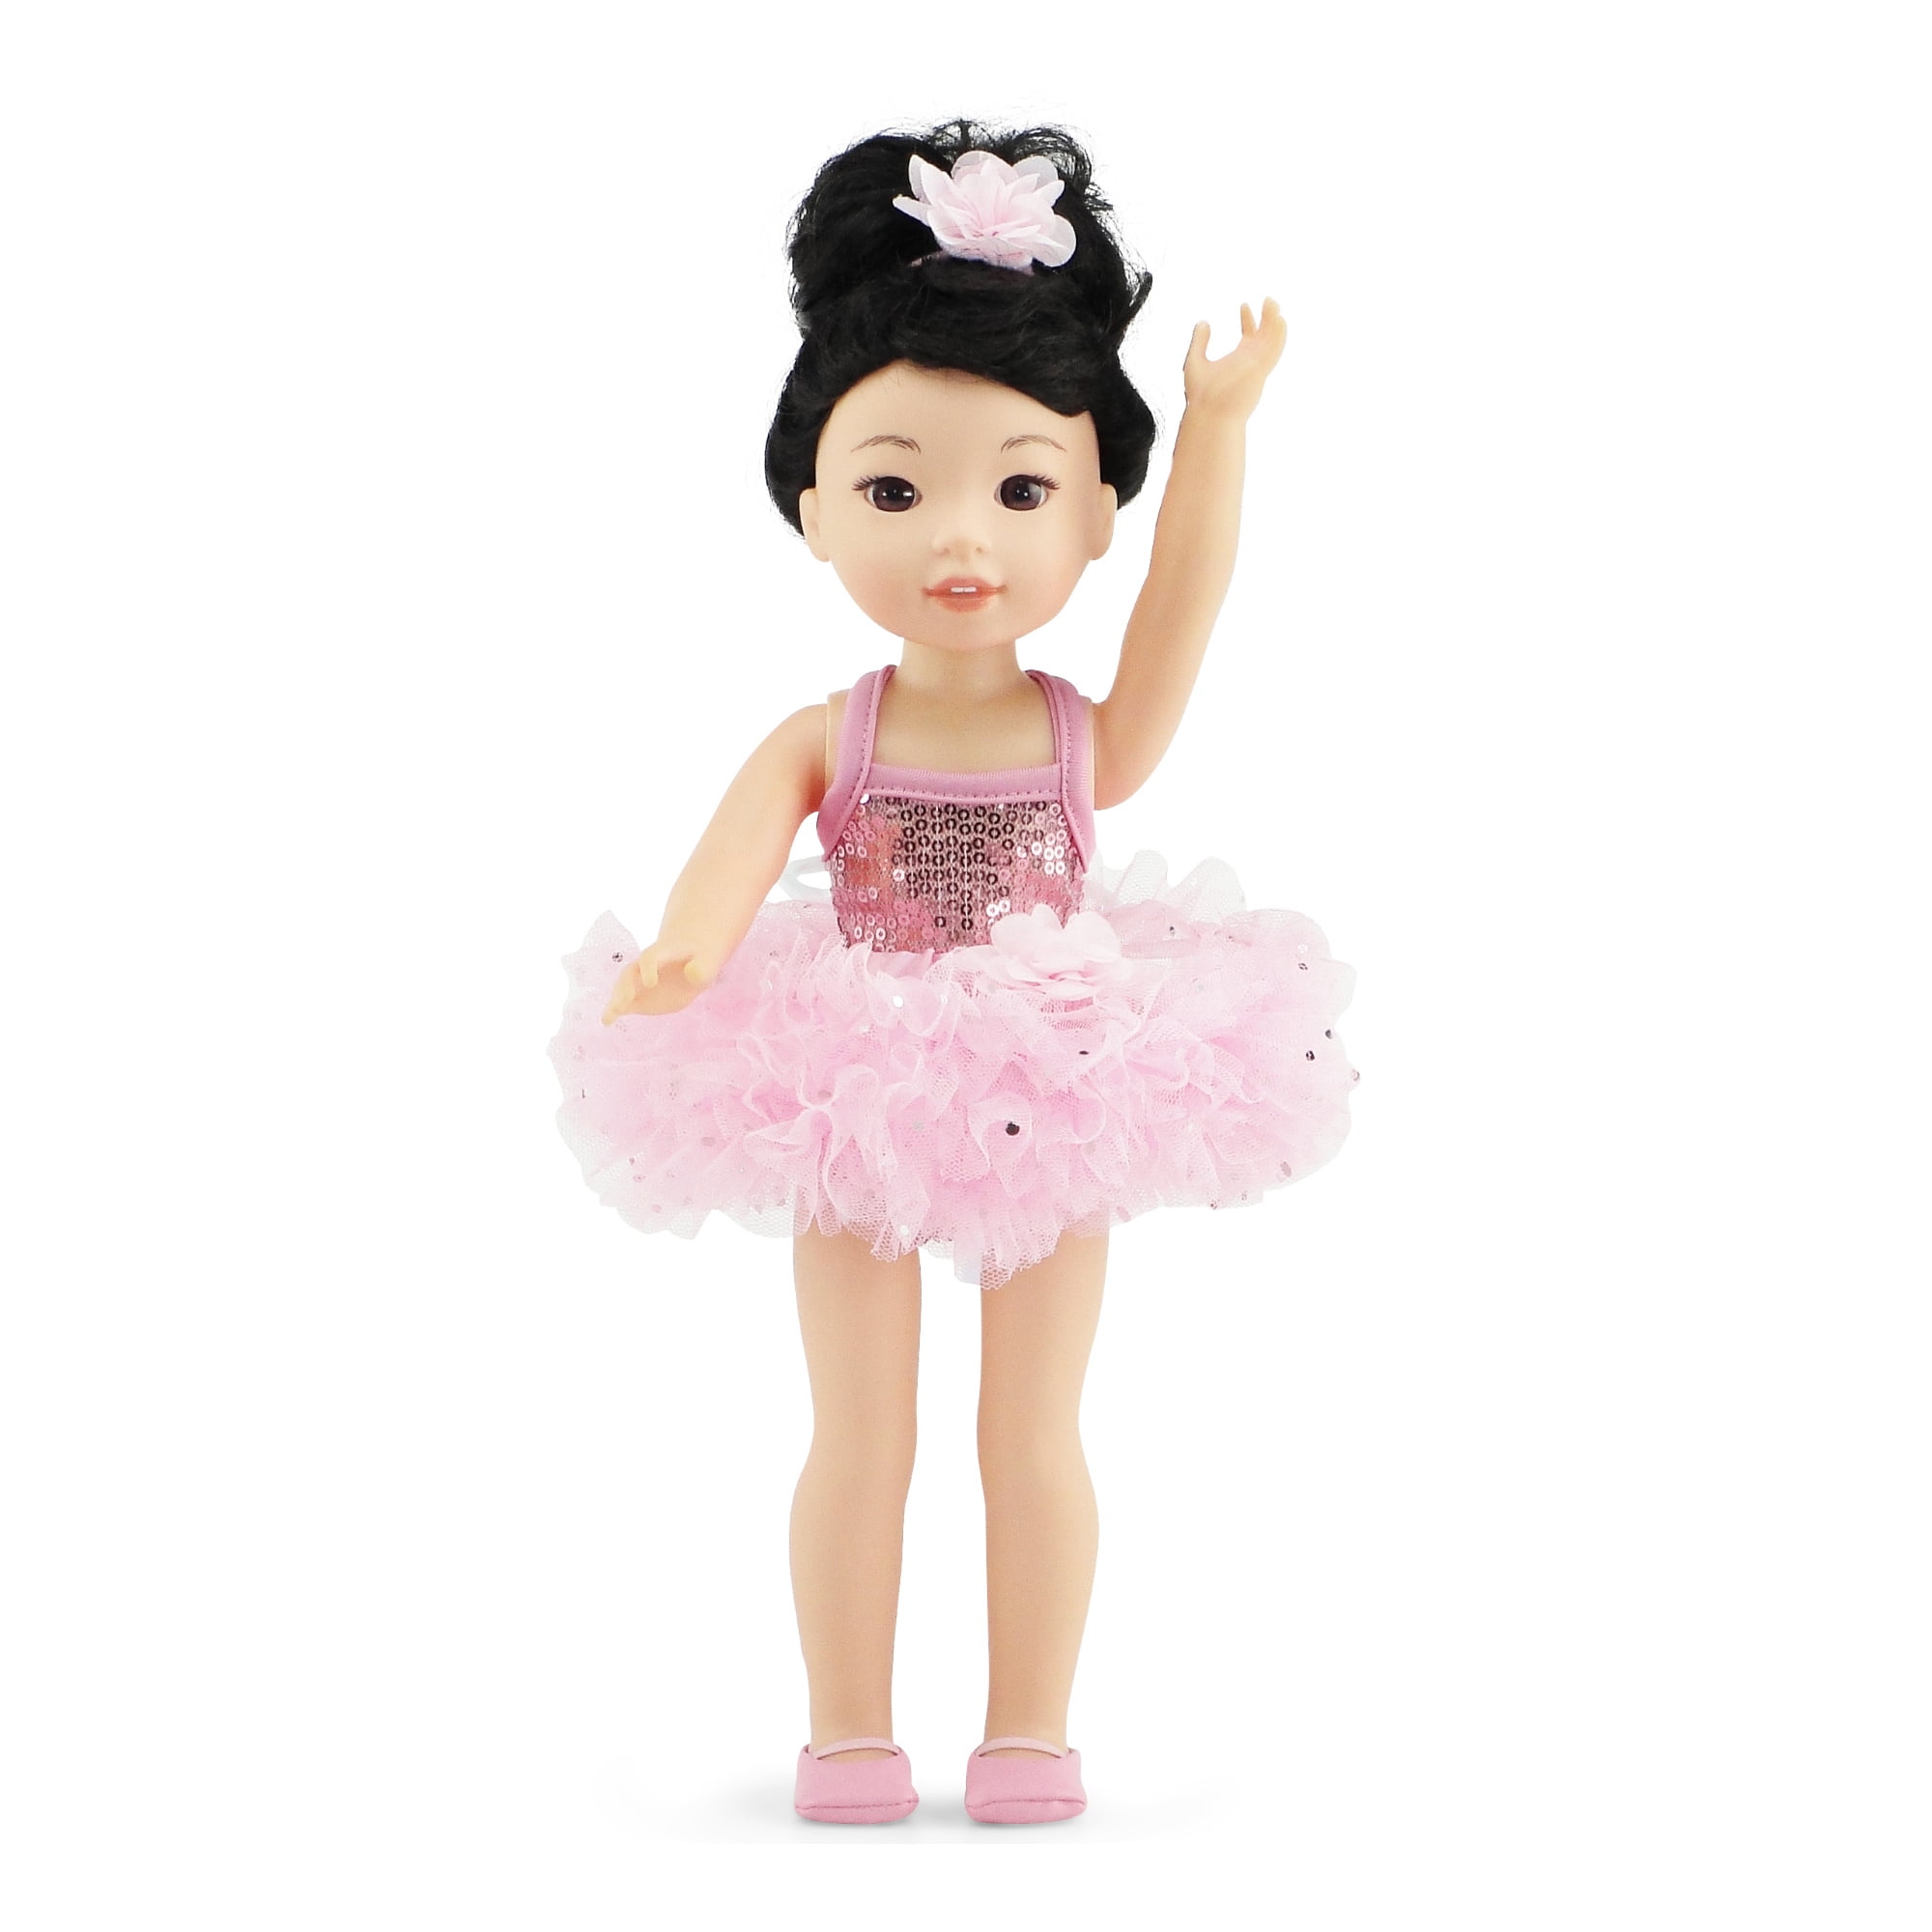 PINK SPARKLE BALLET TUTU  Fits American Girl Our Generation 18 Inch Doll Clothes 